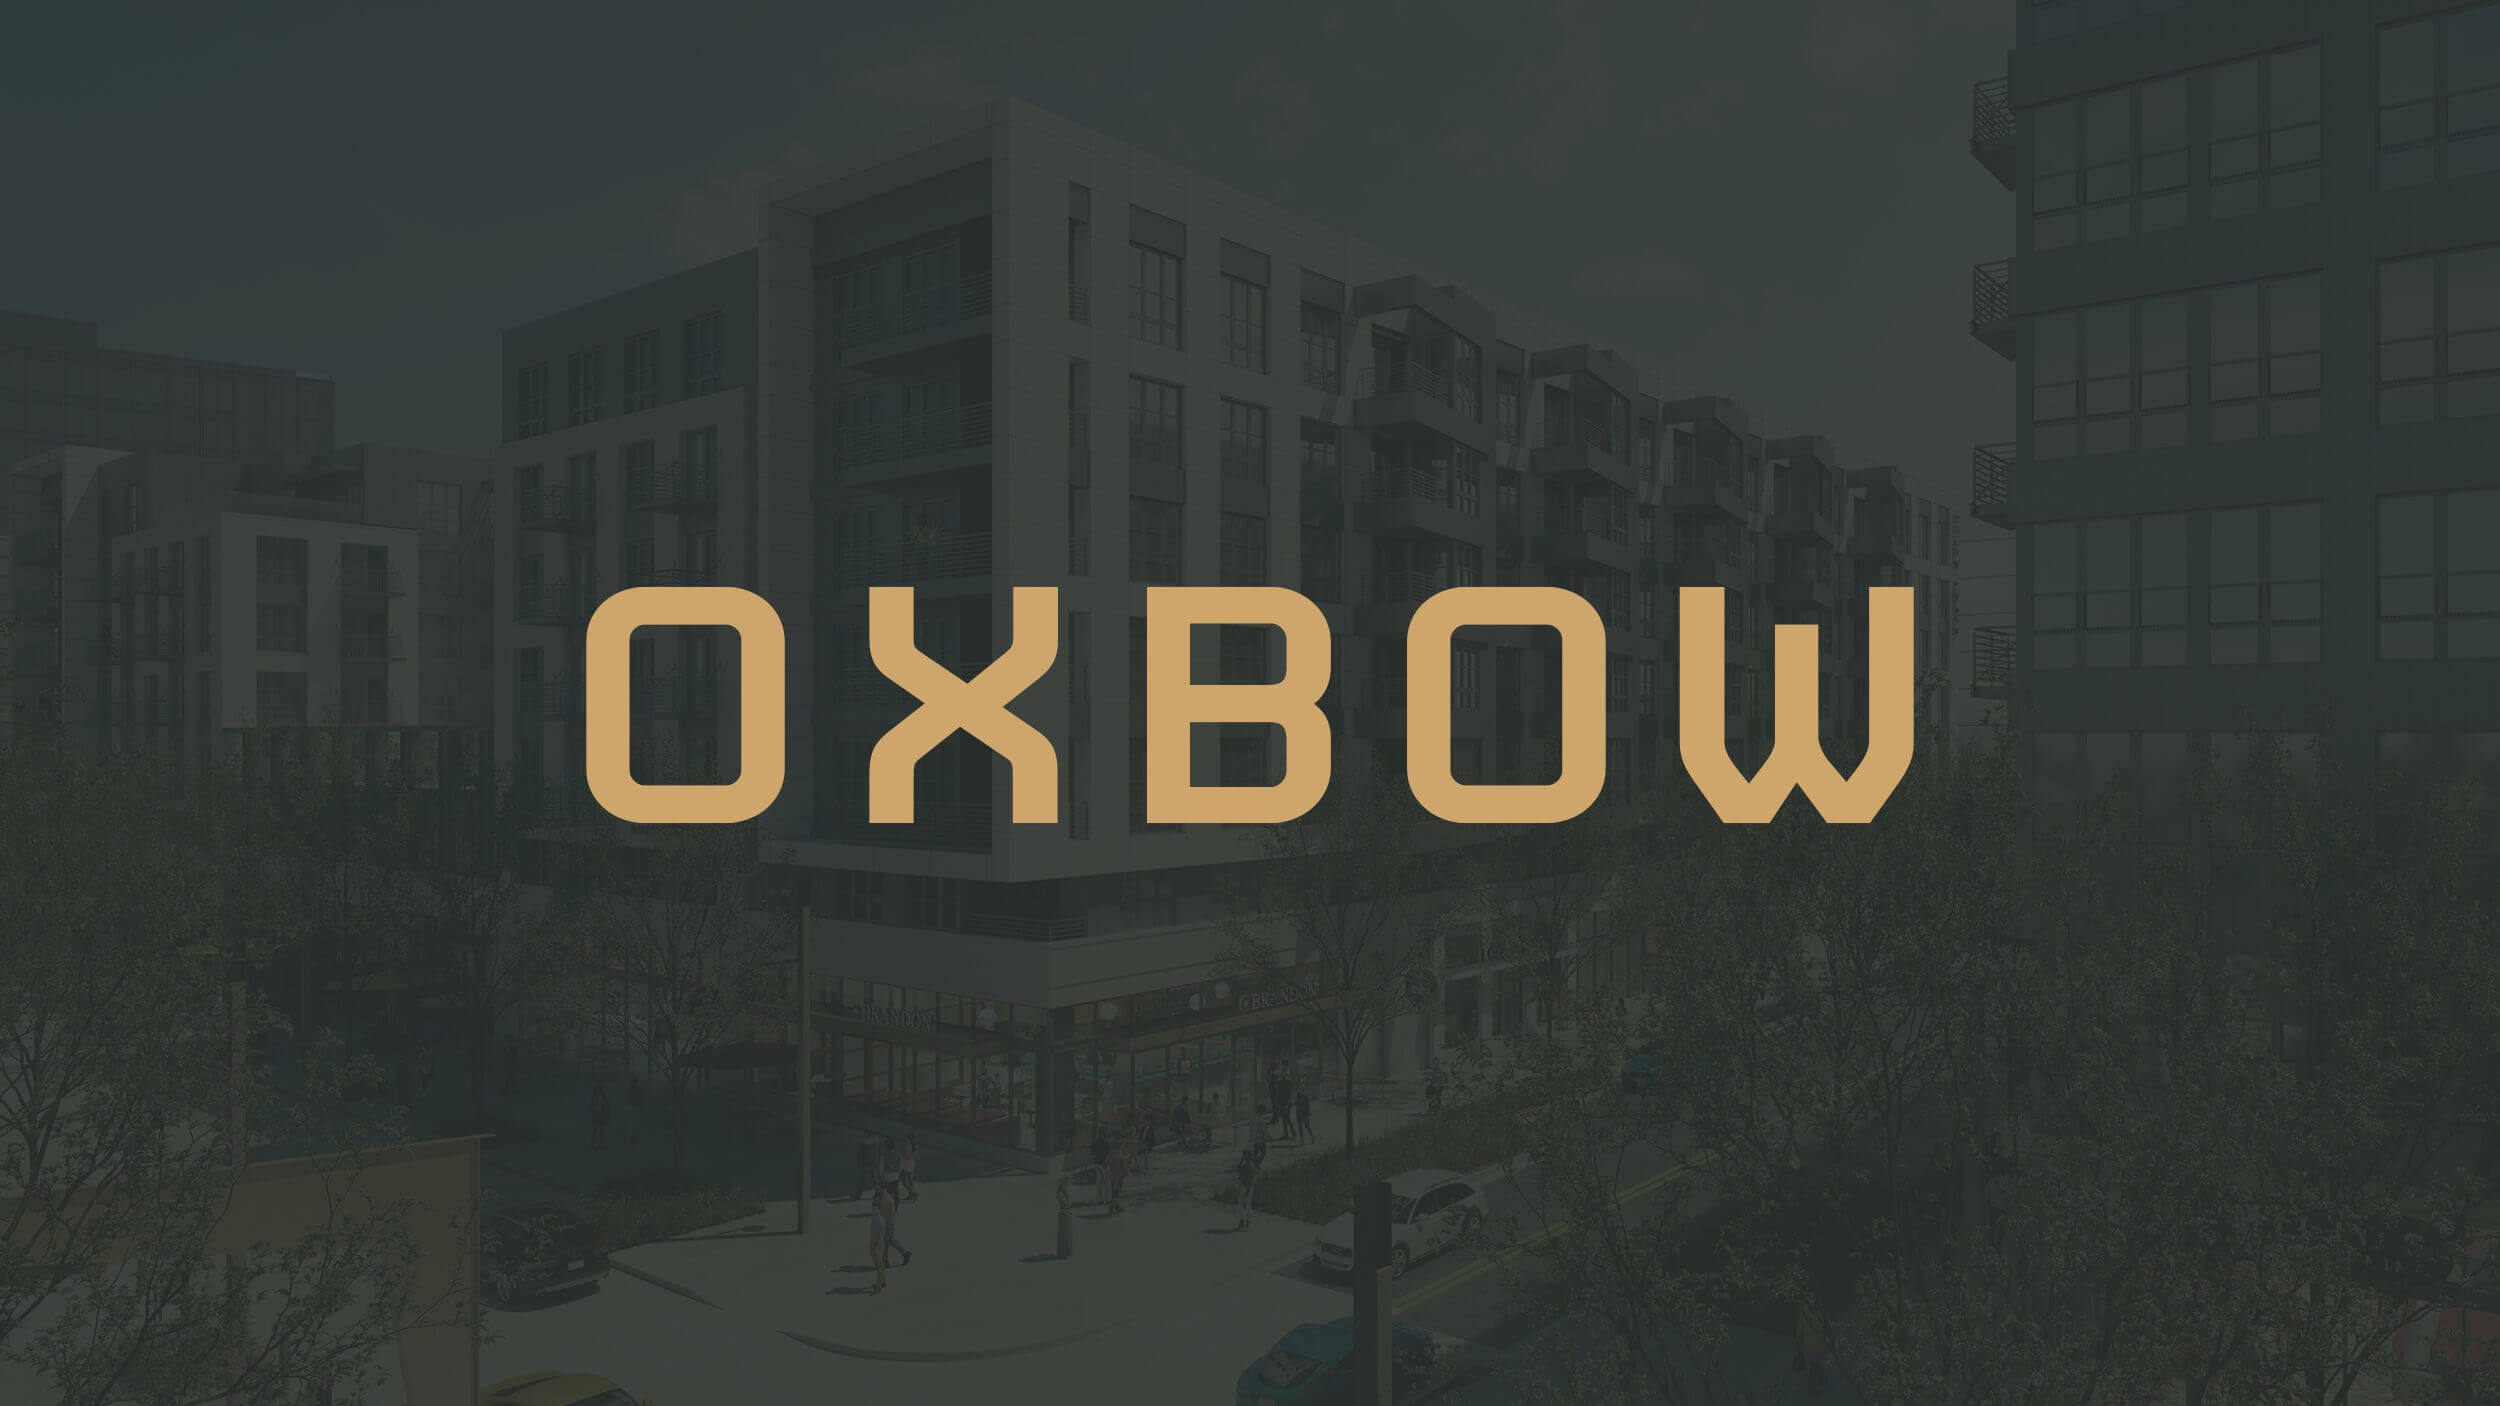 gold Oxbow logo on dark background with building render